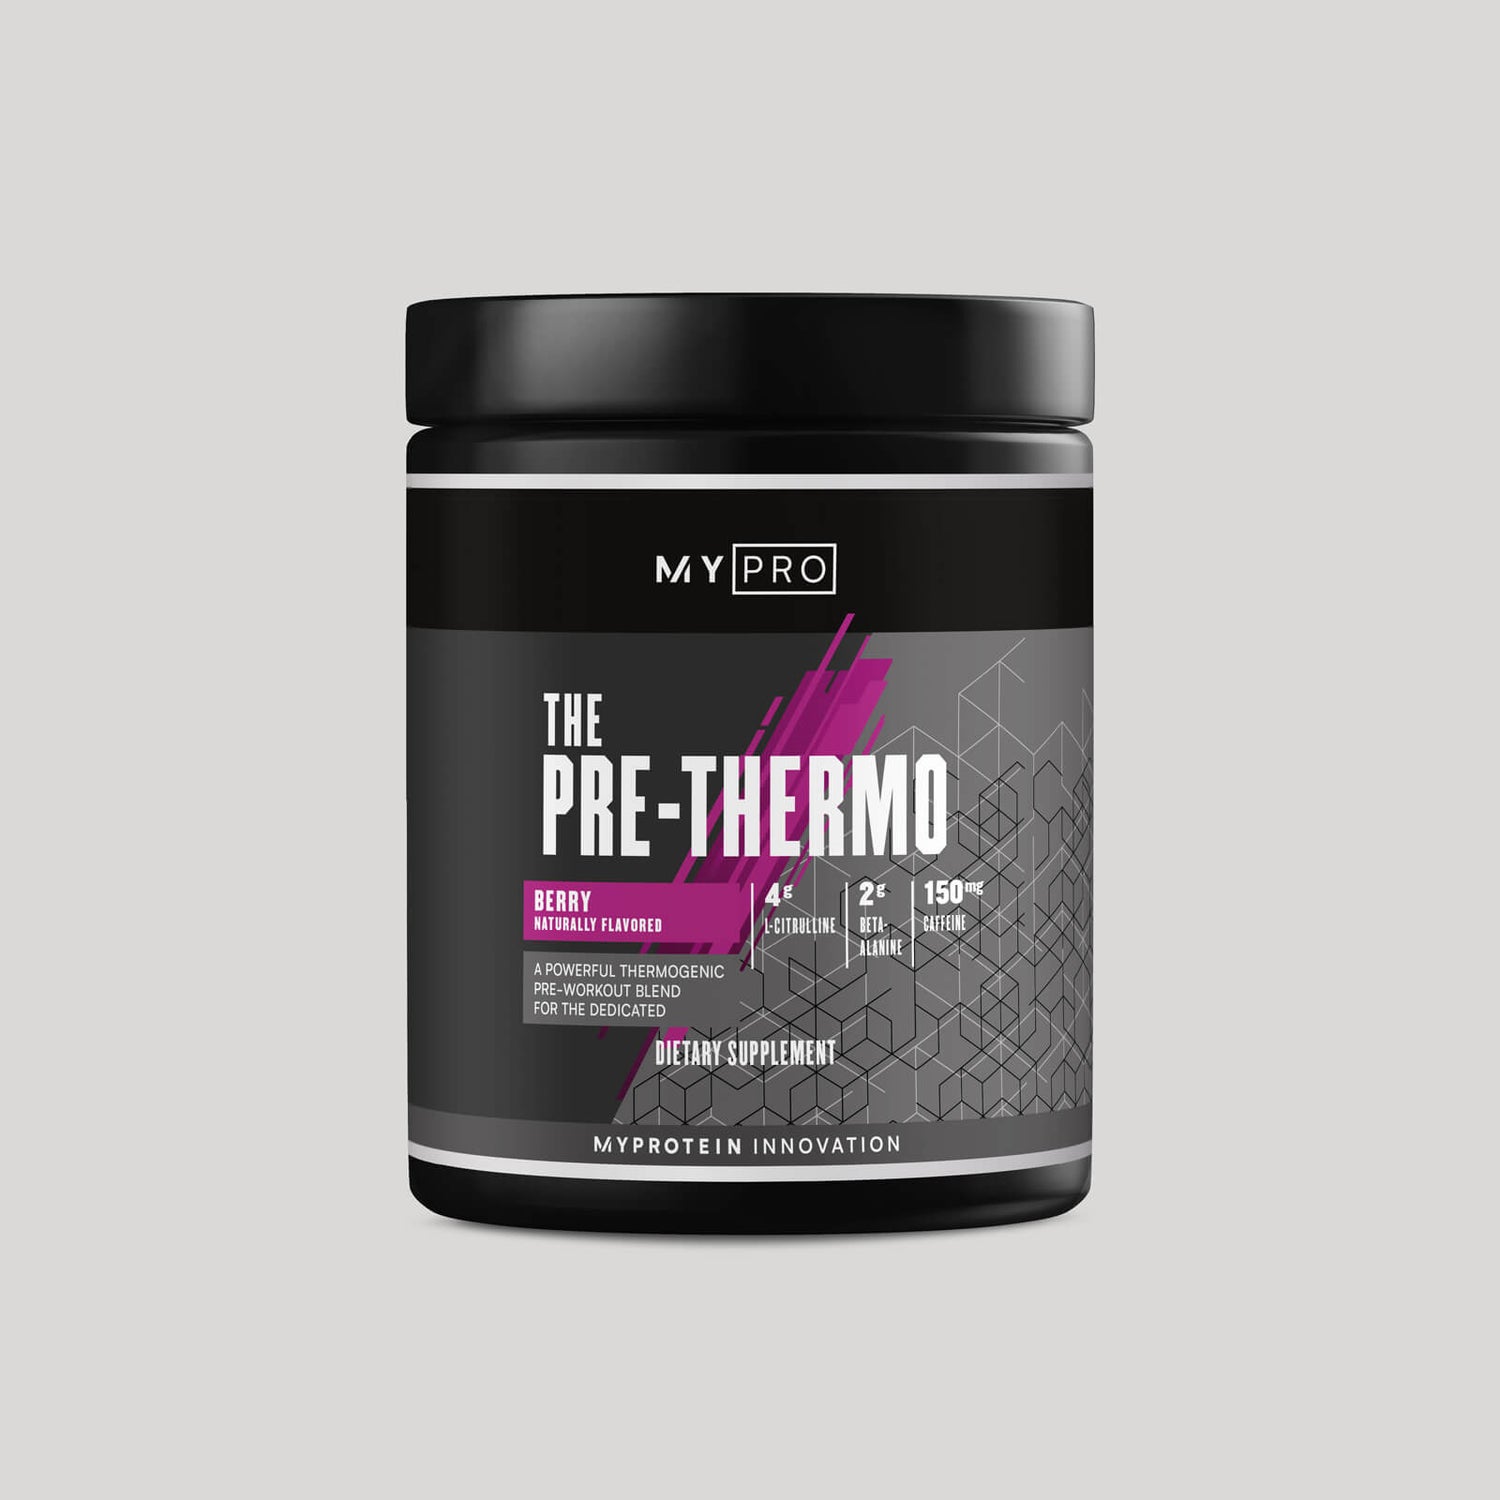 THE PREWORKOUT THERMO - 0.66lb - Berry